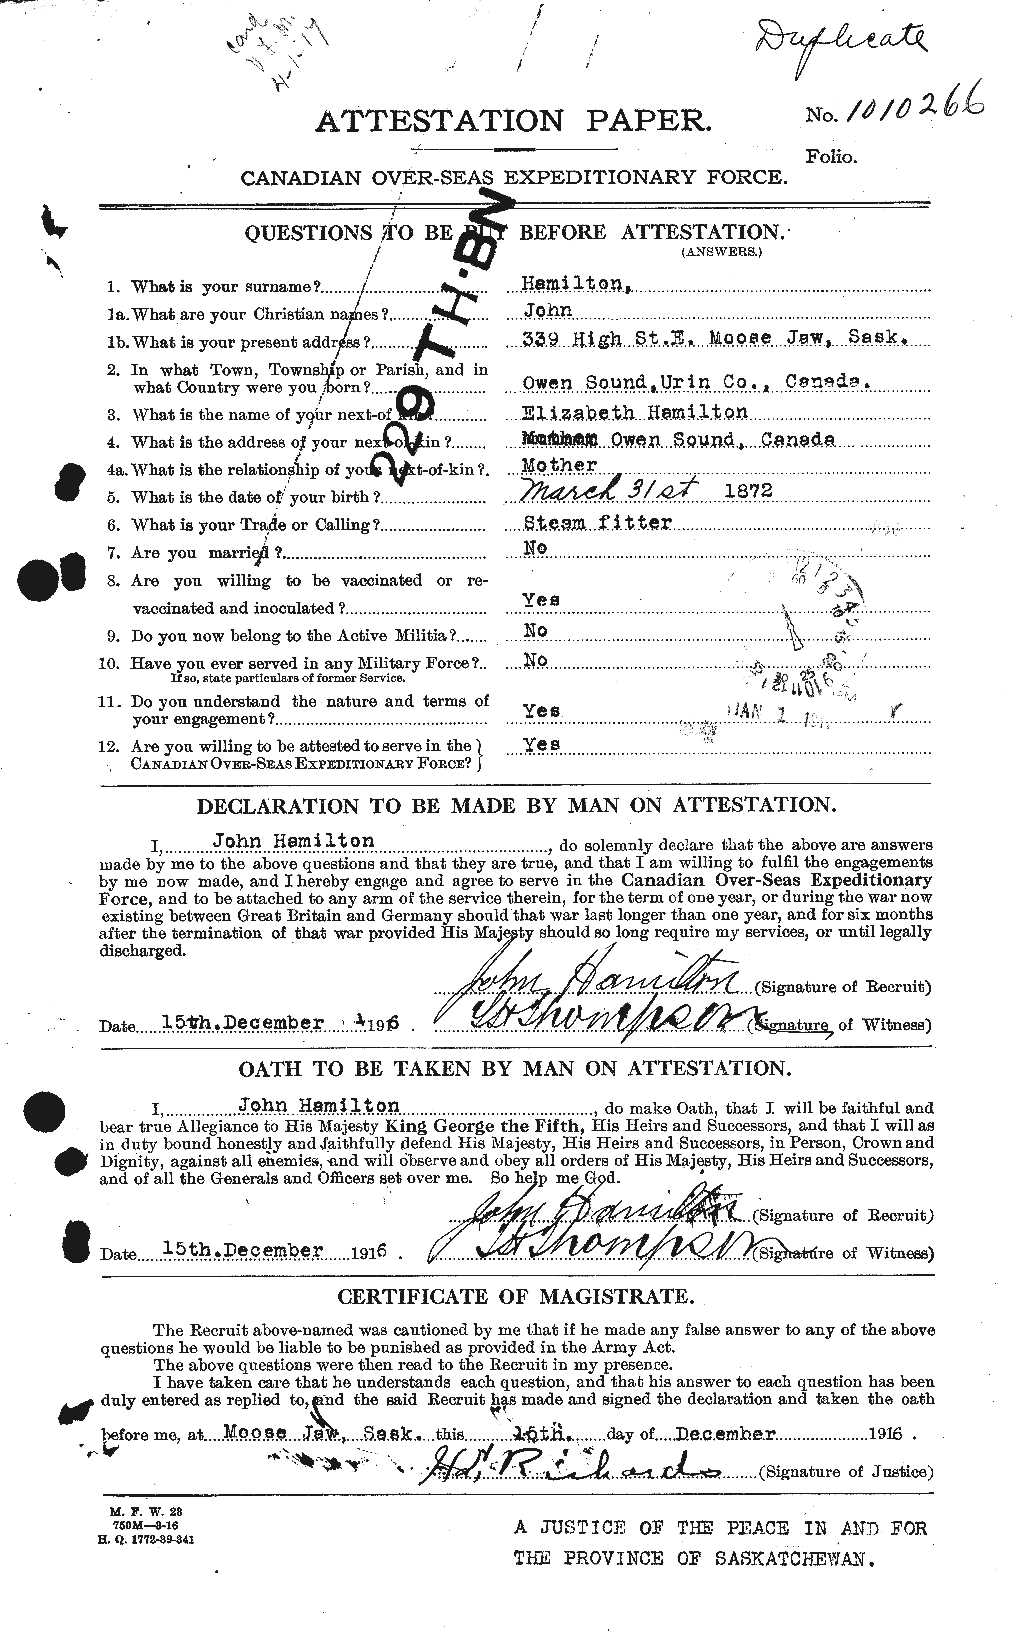 Personnel Records of the First World War - CEF 373042a